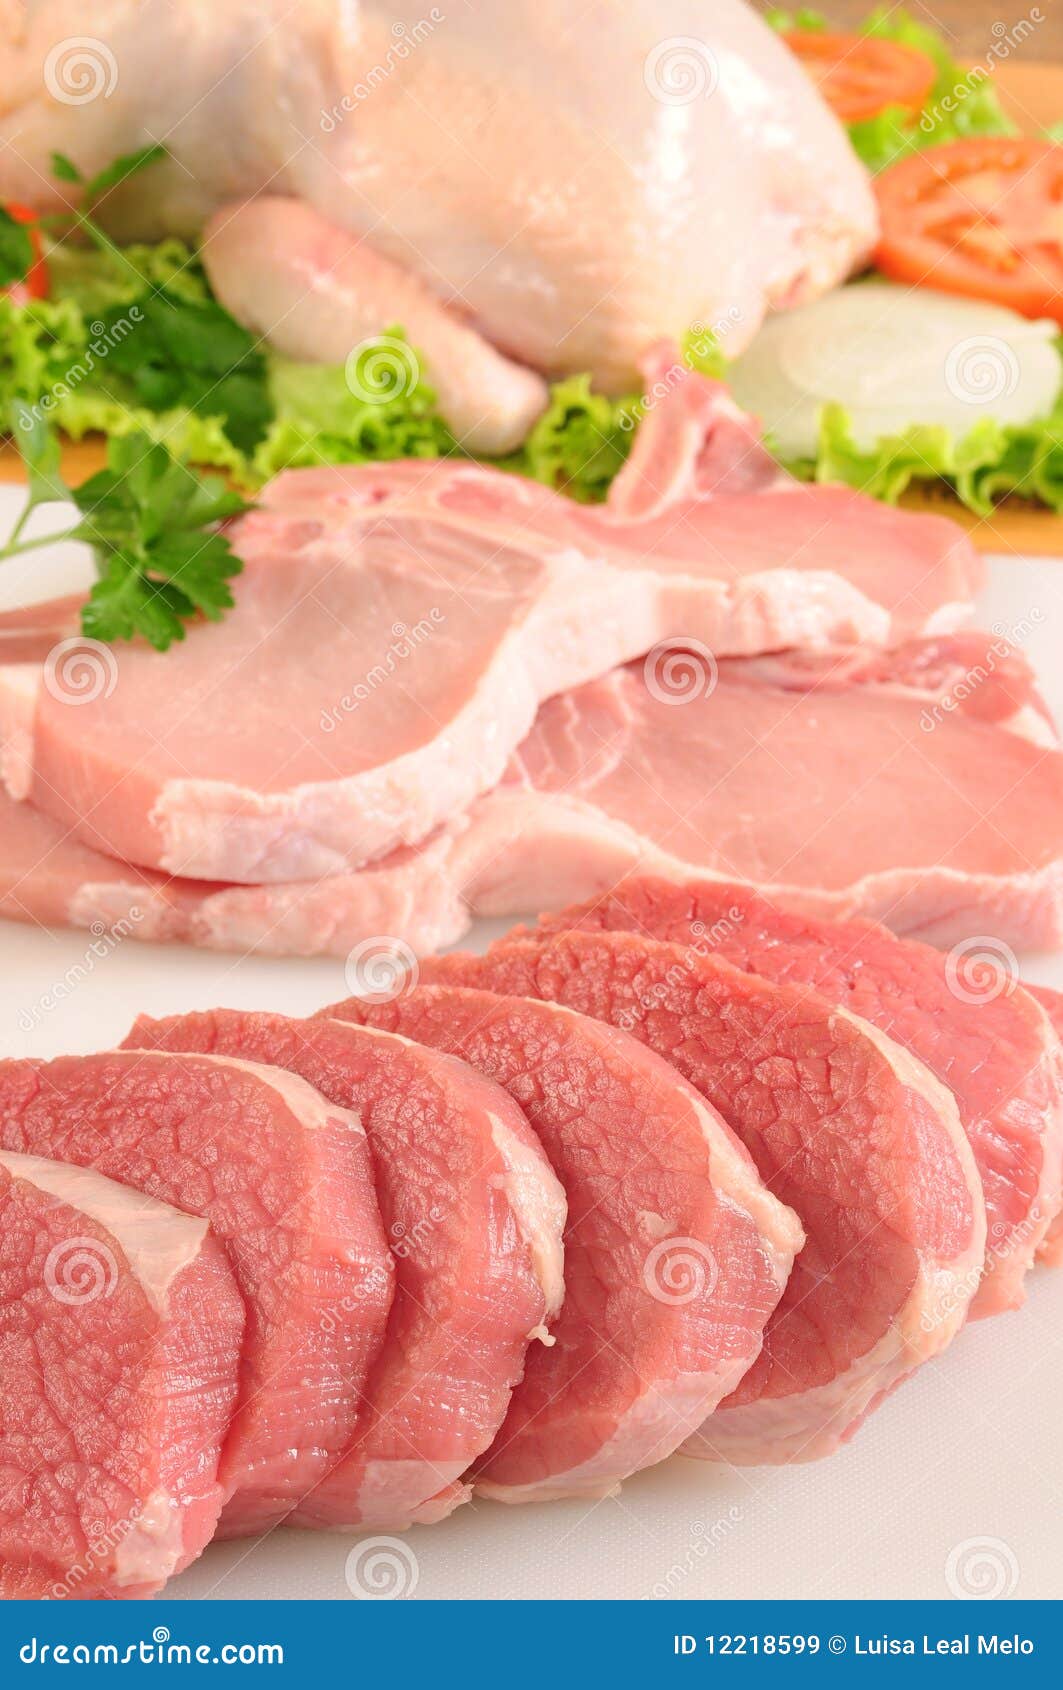 Red Meat And Chicken Royalty Free Stock Images - Image ...